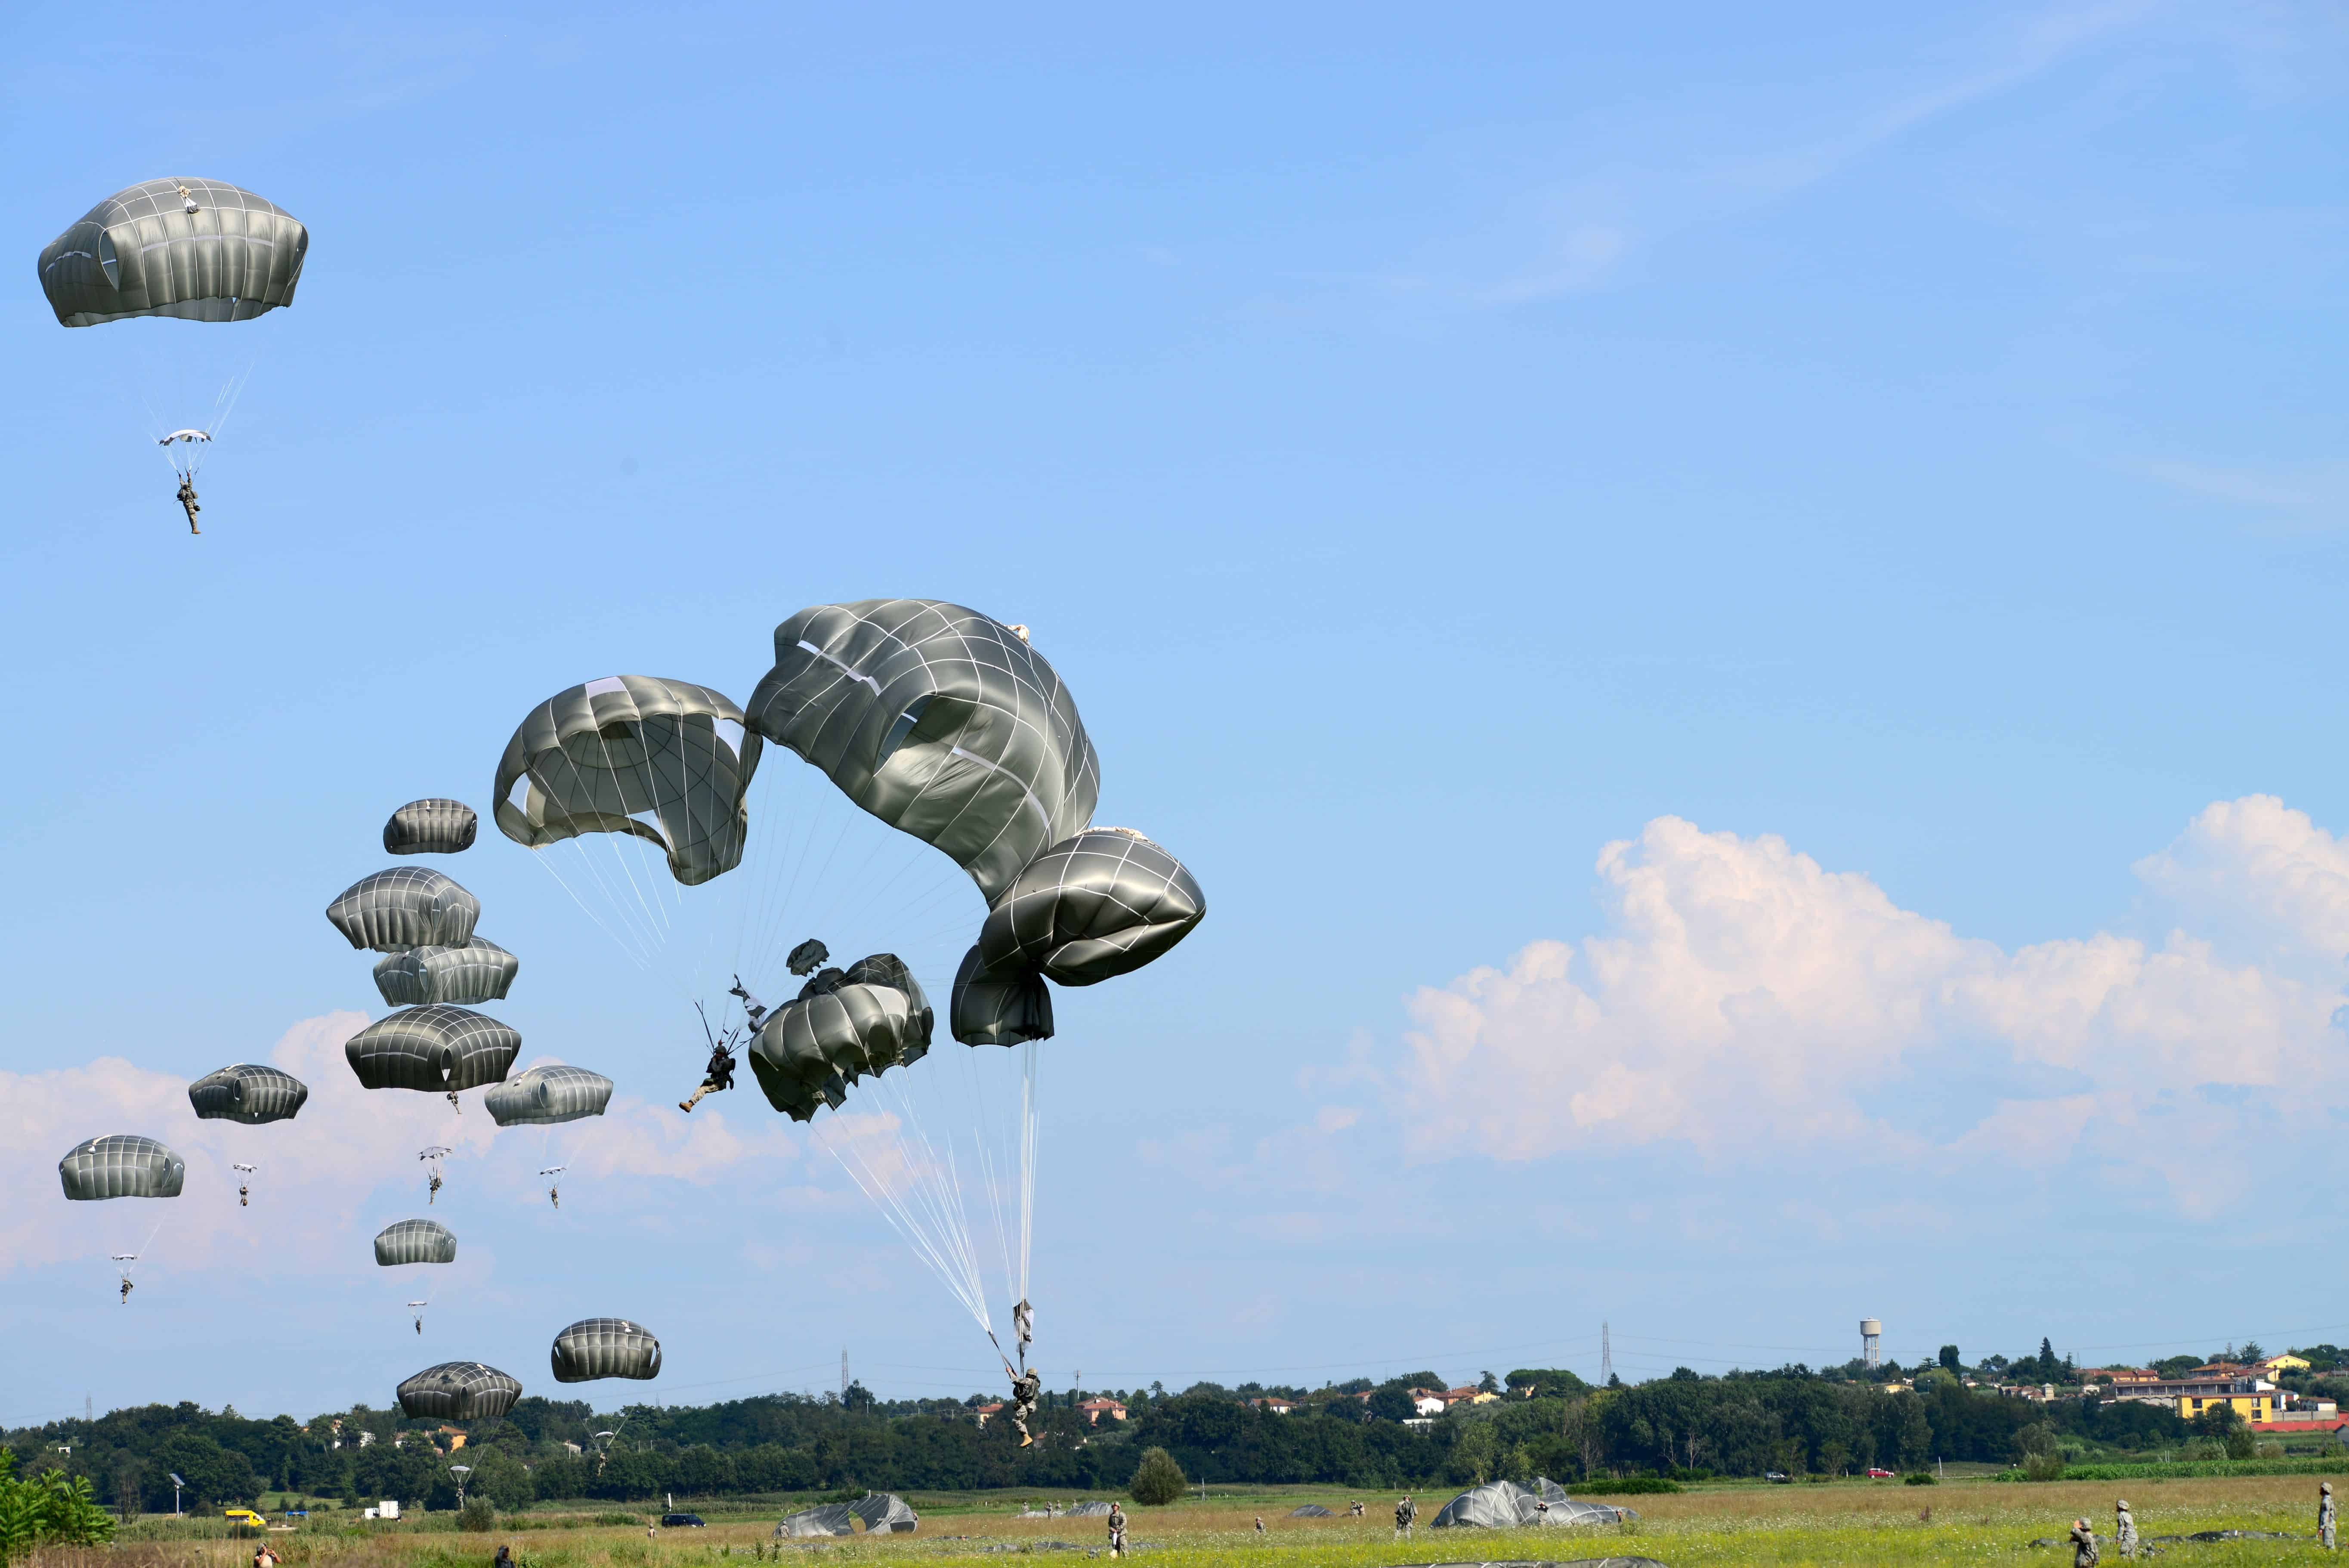 U.S. Army paratroopers with the 173rd Airborne Brigade execute emergency procedures in response to a T-11 parachute system malfunction during airborne training above the Nella Drop Zone in Tuscany, Italy, Aug. 7, 2014. (Photo by Training Support Specialist Vincenzo Vitiello/released)